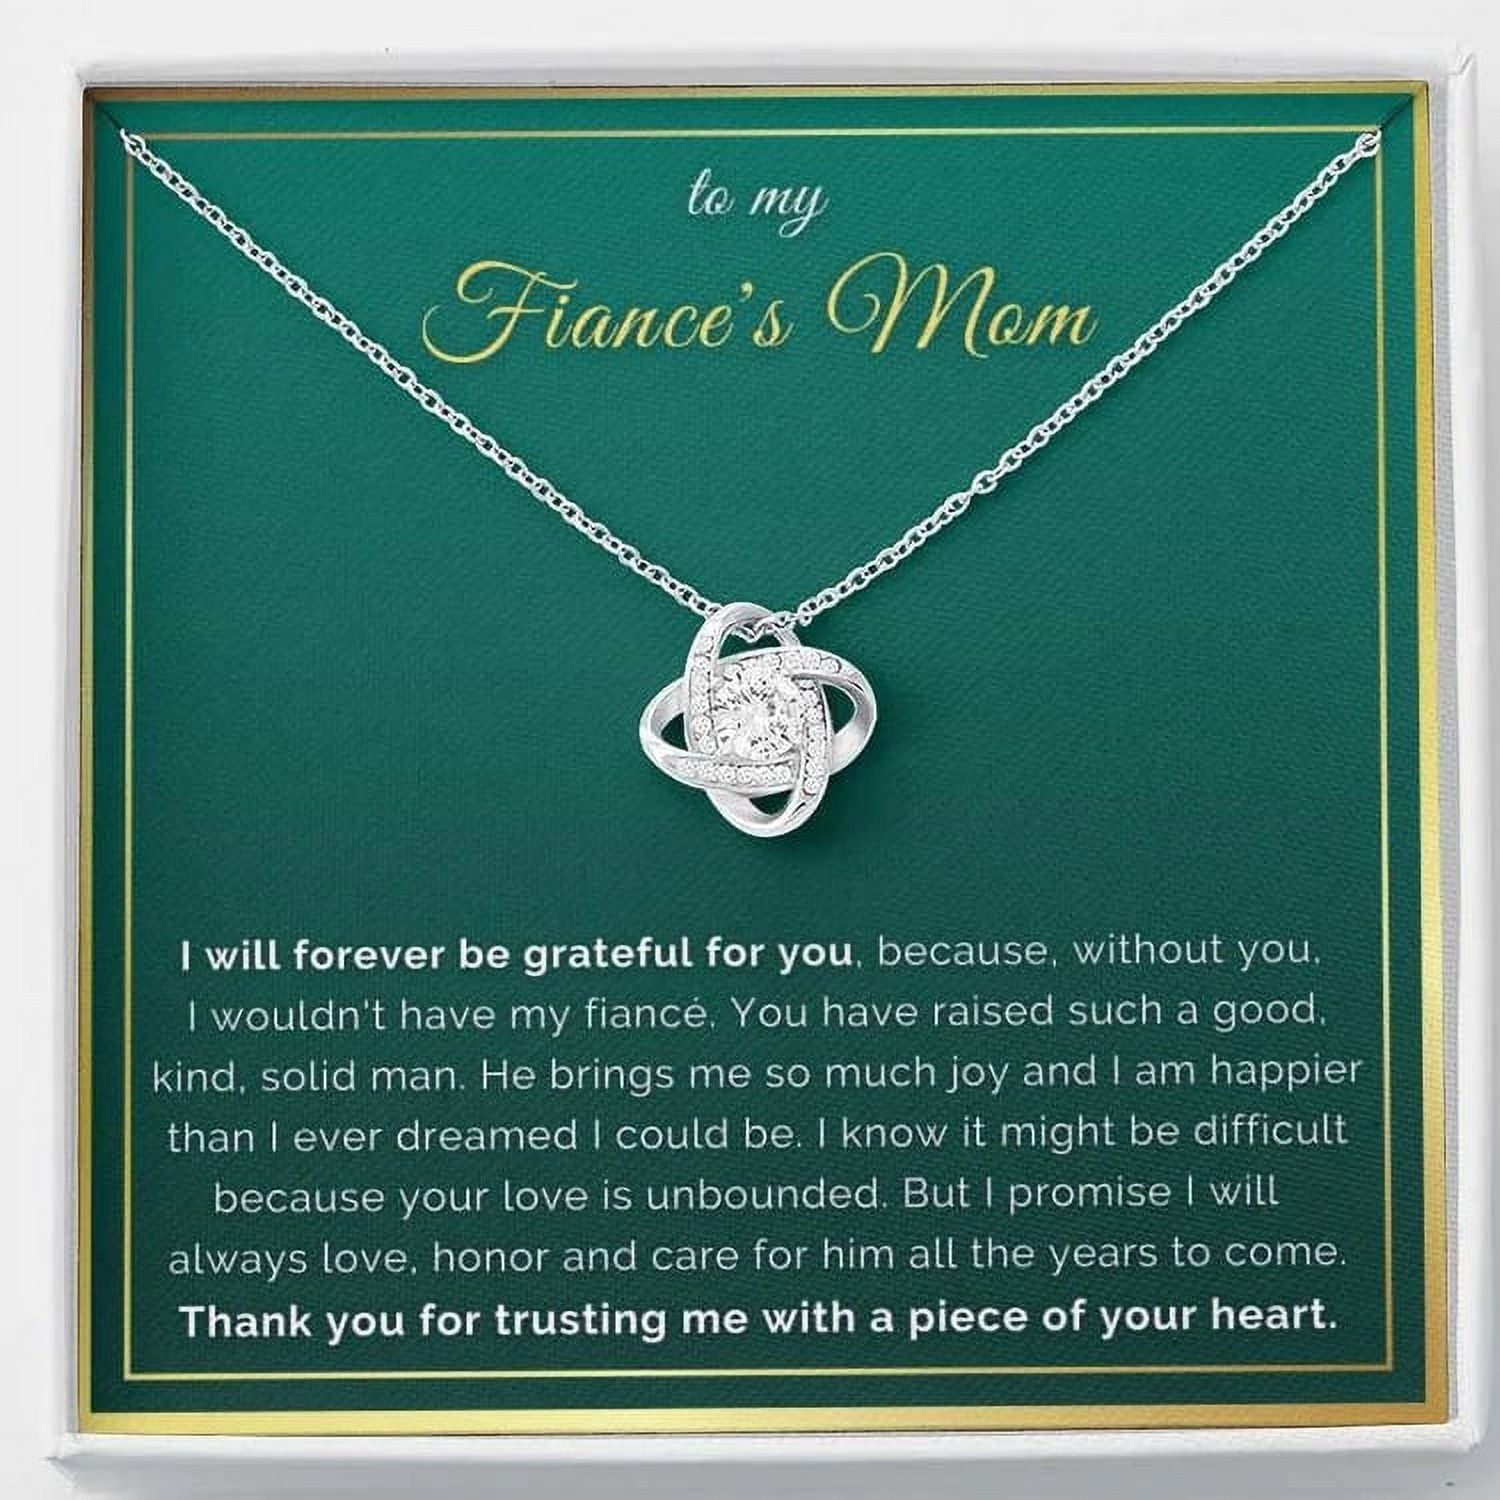 Christmas gifts for mom, mom gifts, mom necklace - SO-7961564 - ZILORRA